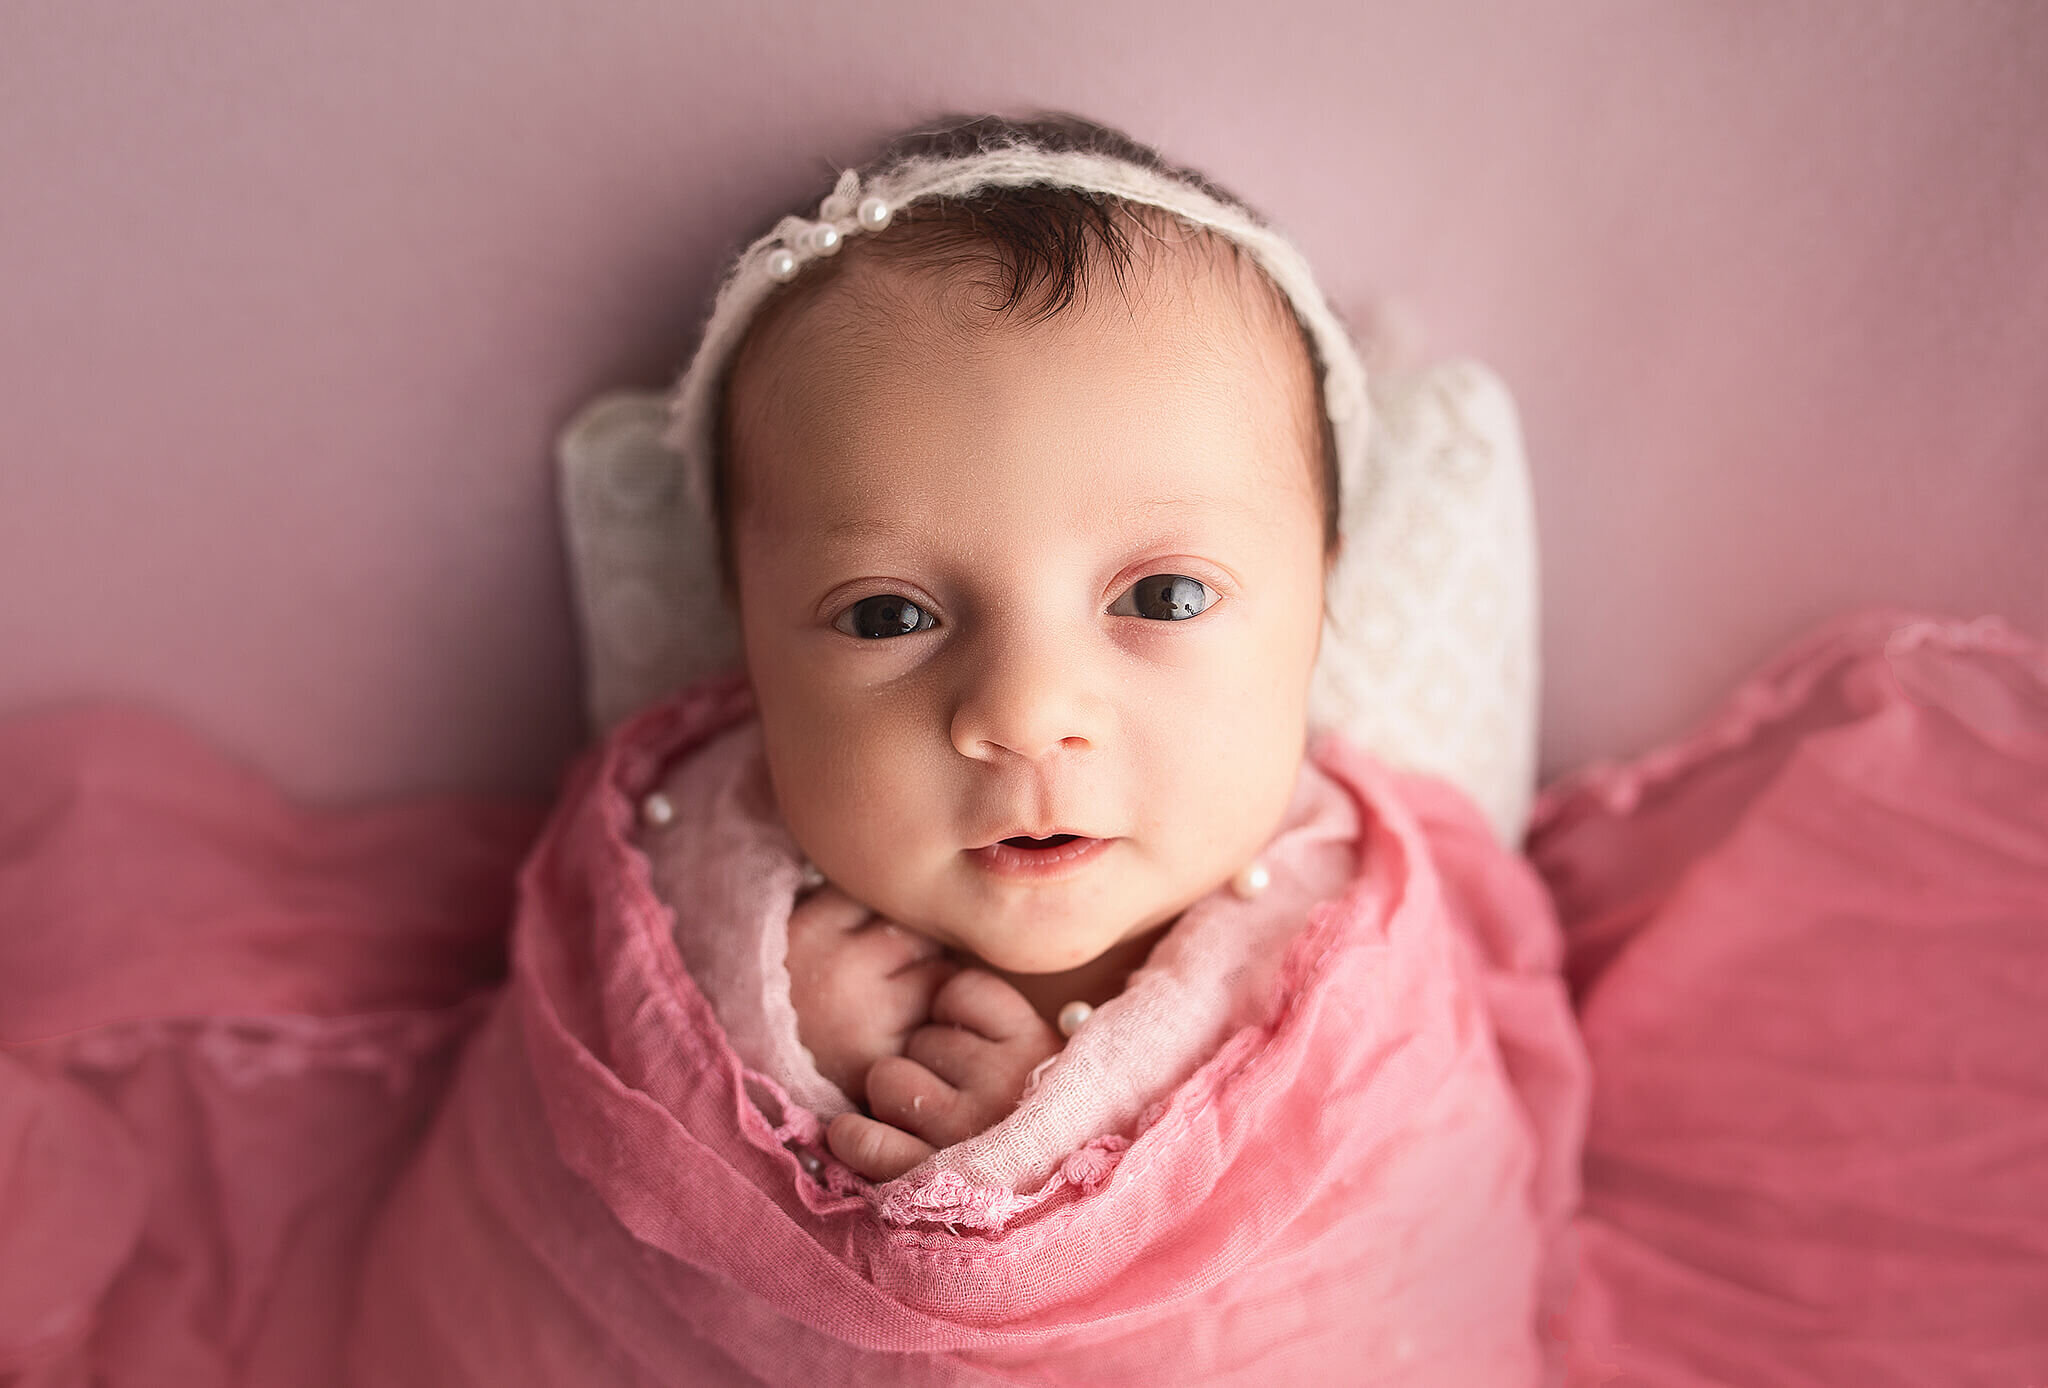 Newborn girl wrapped in pink wrap, laying head on pillow and looking straight at camera